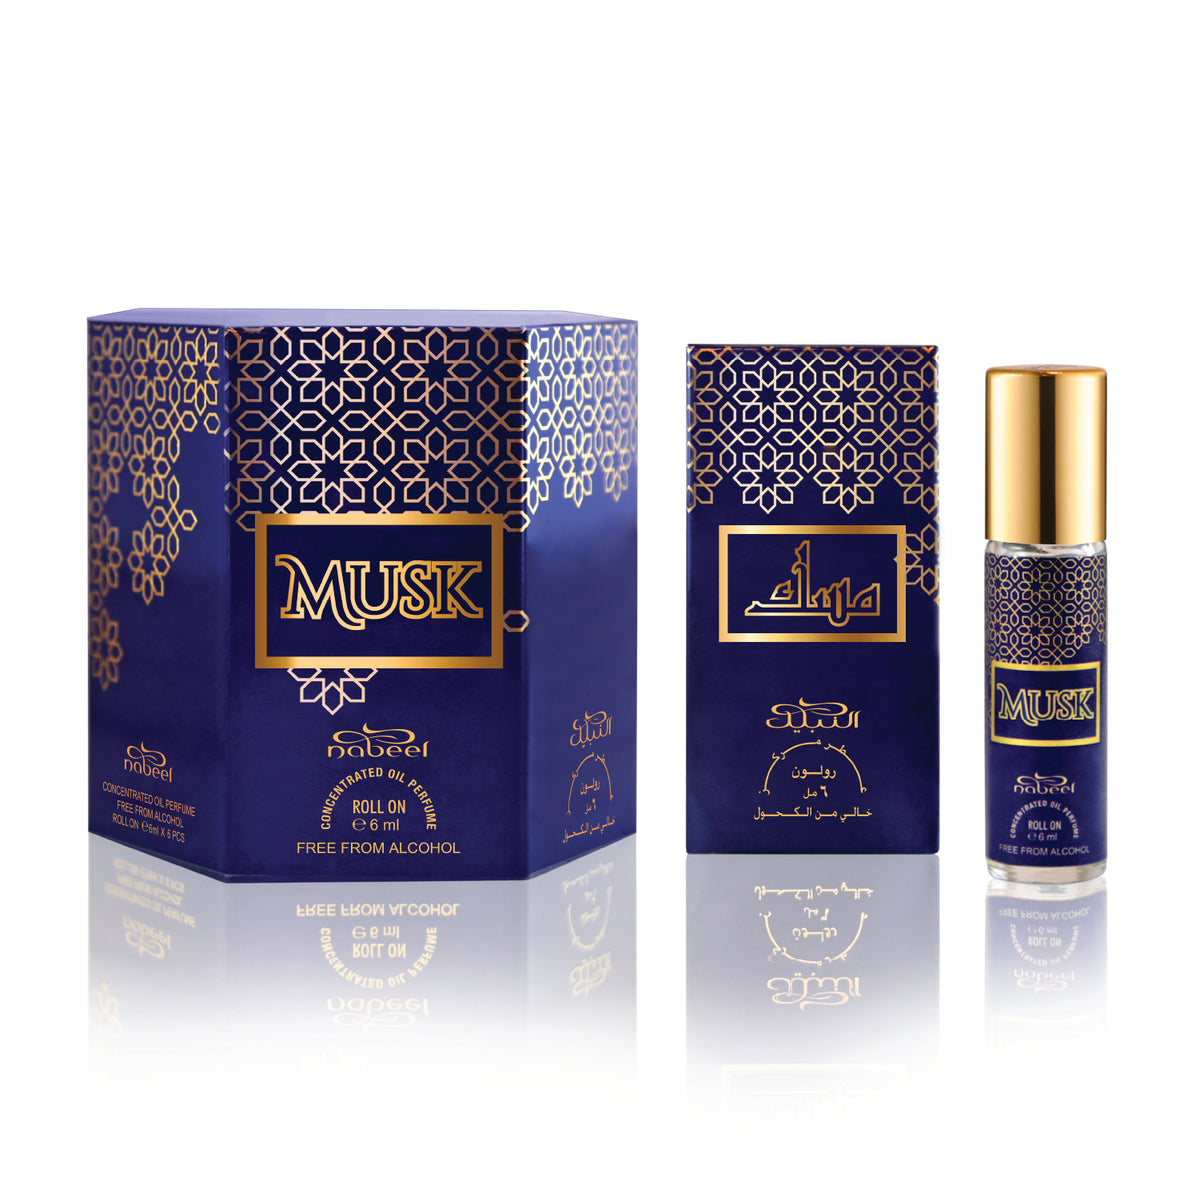 Nabeel - Musk Premium Attar Roll-on Perfume Oil | 100% Non Alcoholic | Gift Set - 6ml (Pack of 6) | Made in U.A.E